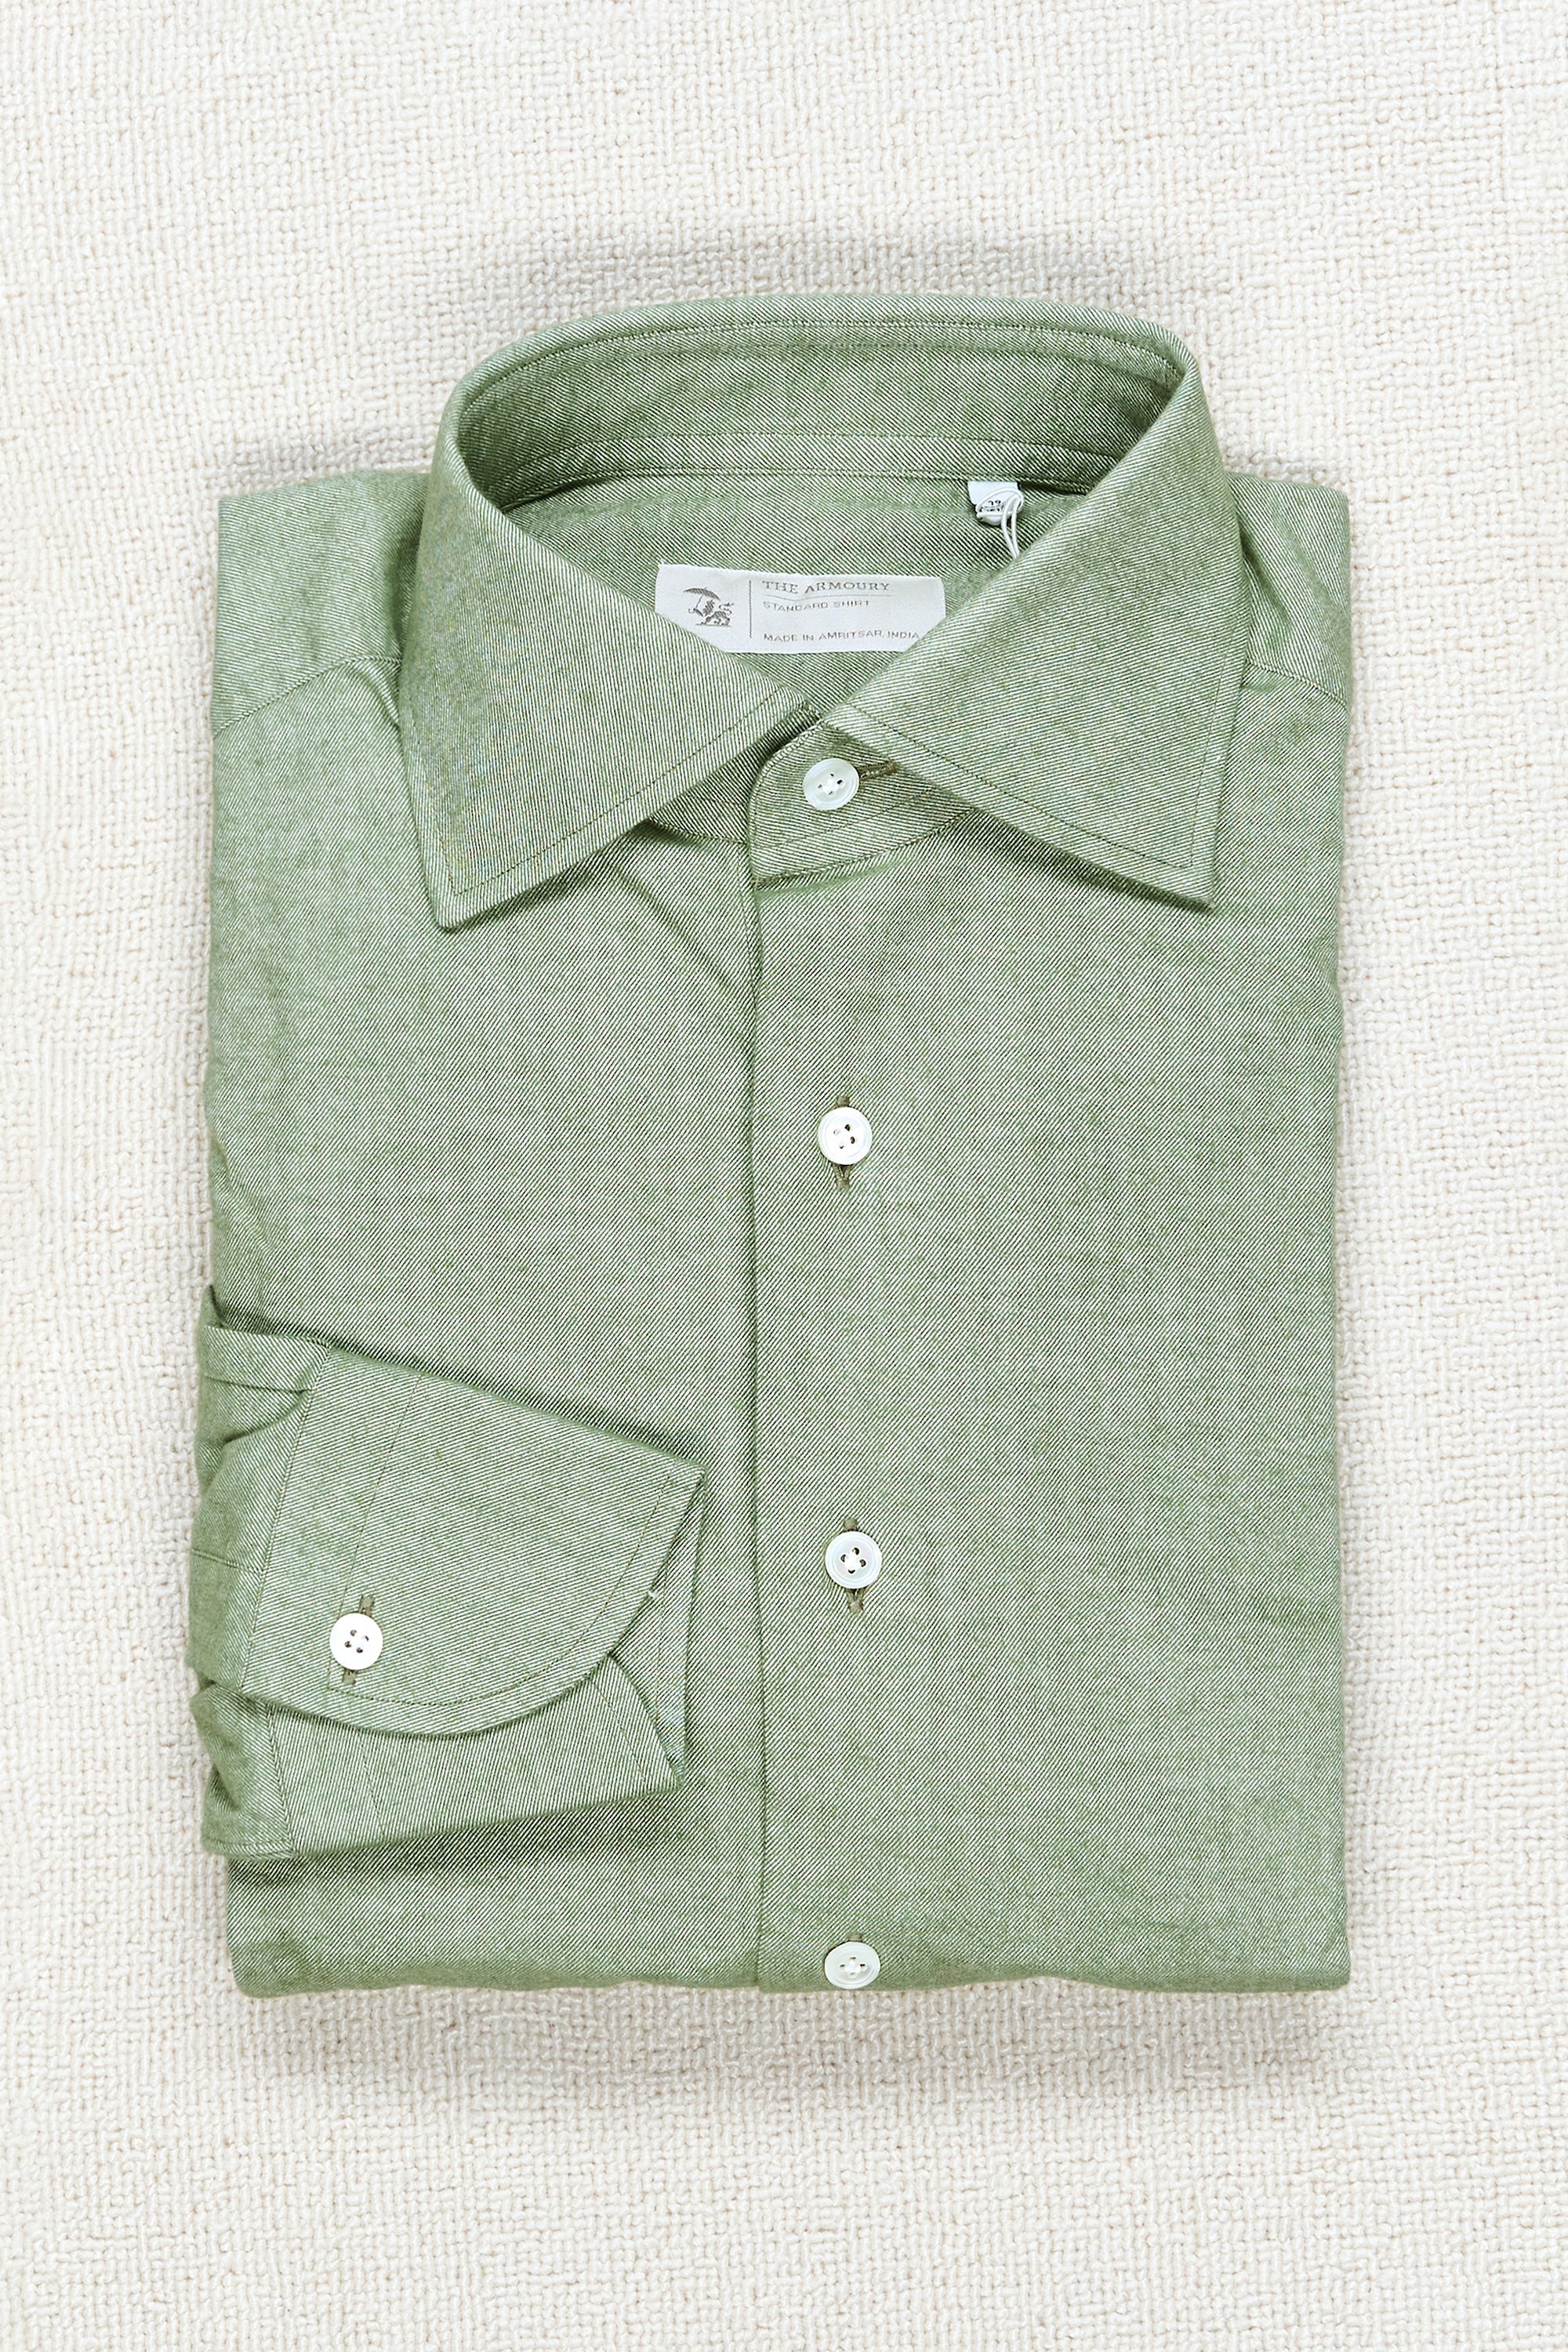 The Armoury by 100 Hands Green Brushed Cotton Spread Collar Shirt